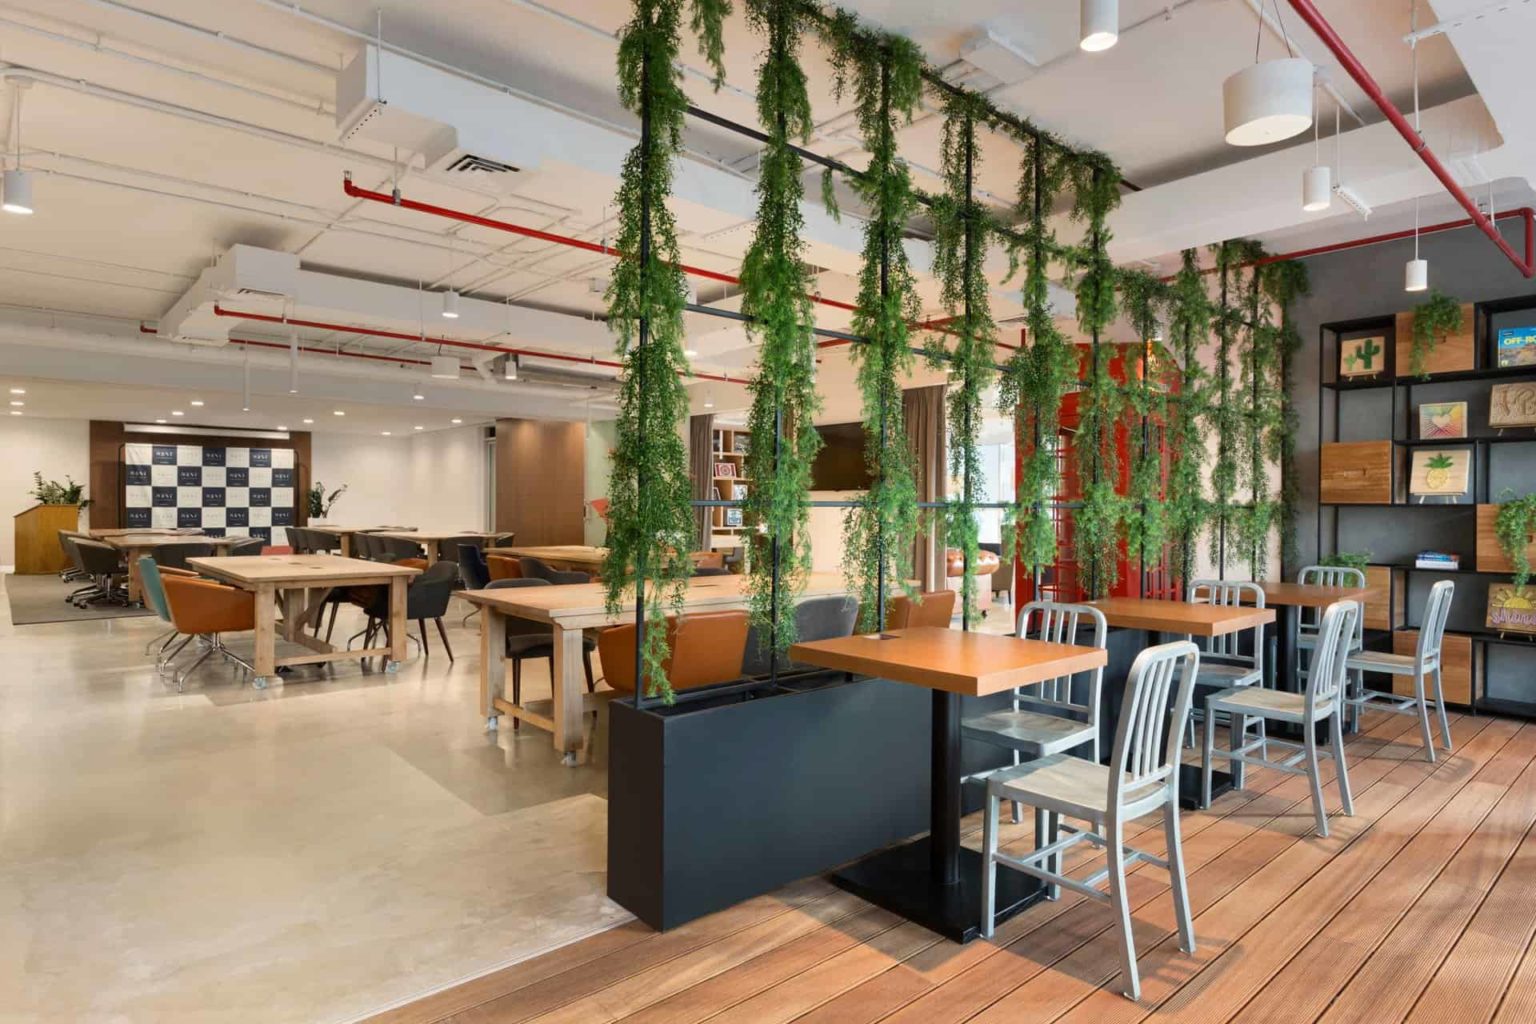 TRYP by Wyndham Dubai business center with tables, desks, and a trellis with decorative plants